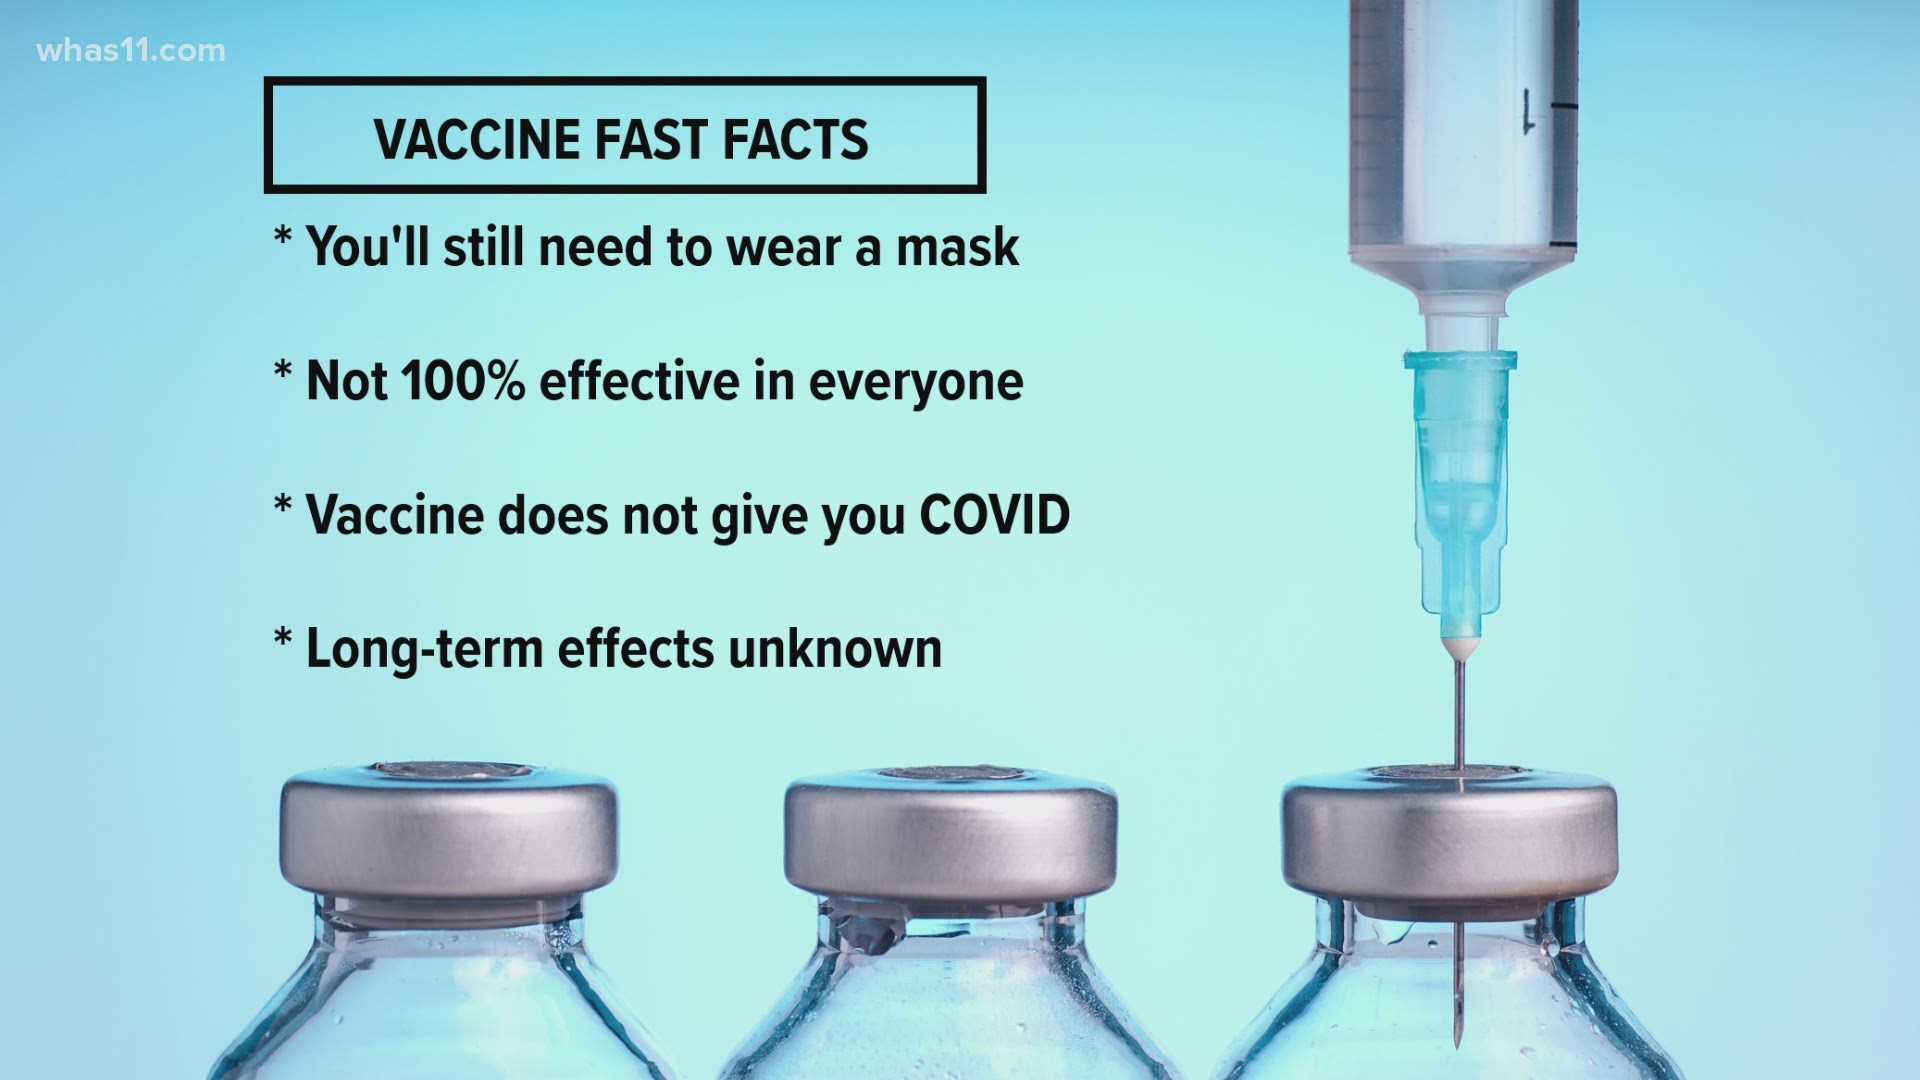 Facts Not Fiction: As states prepare to administer the COVID-19 vaccine, here are some fast facts you should keep in mind.